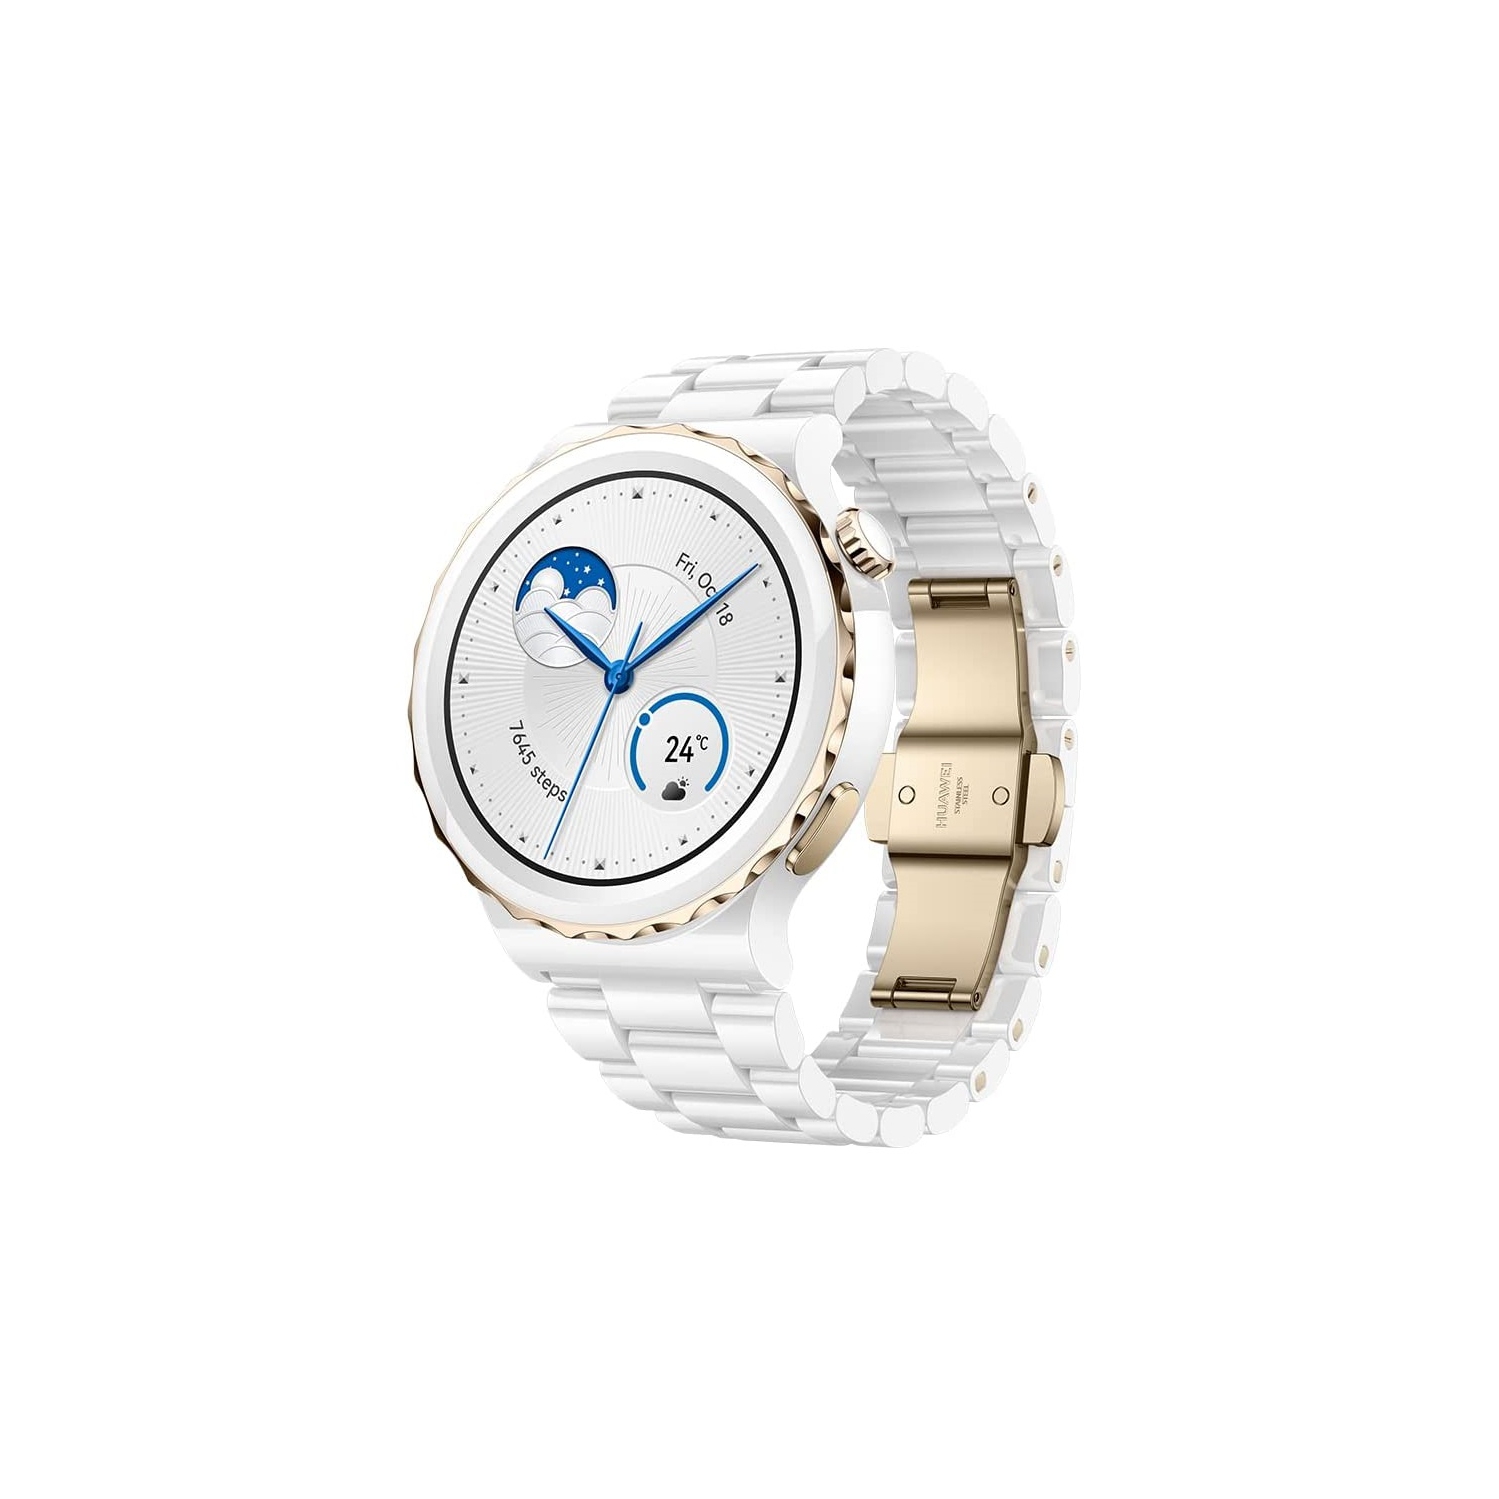 HUAWEI WATCH GT 3 Pro Smartwatch - Fashionable Fitness Tracker and Health Monitoring, Durable Battery, Bluetooth, 43mm, White Ceramic Strap